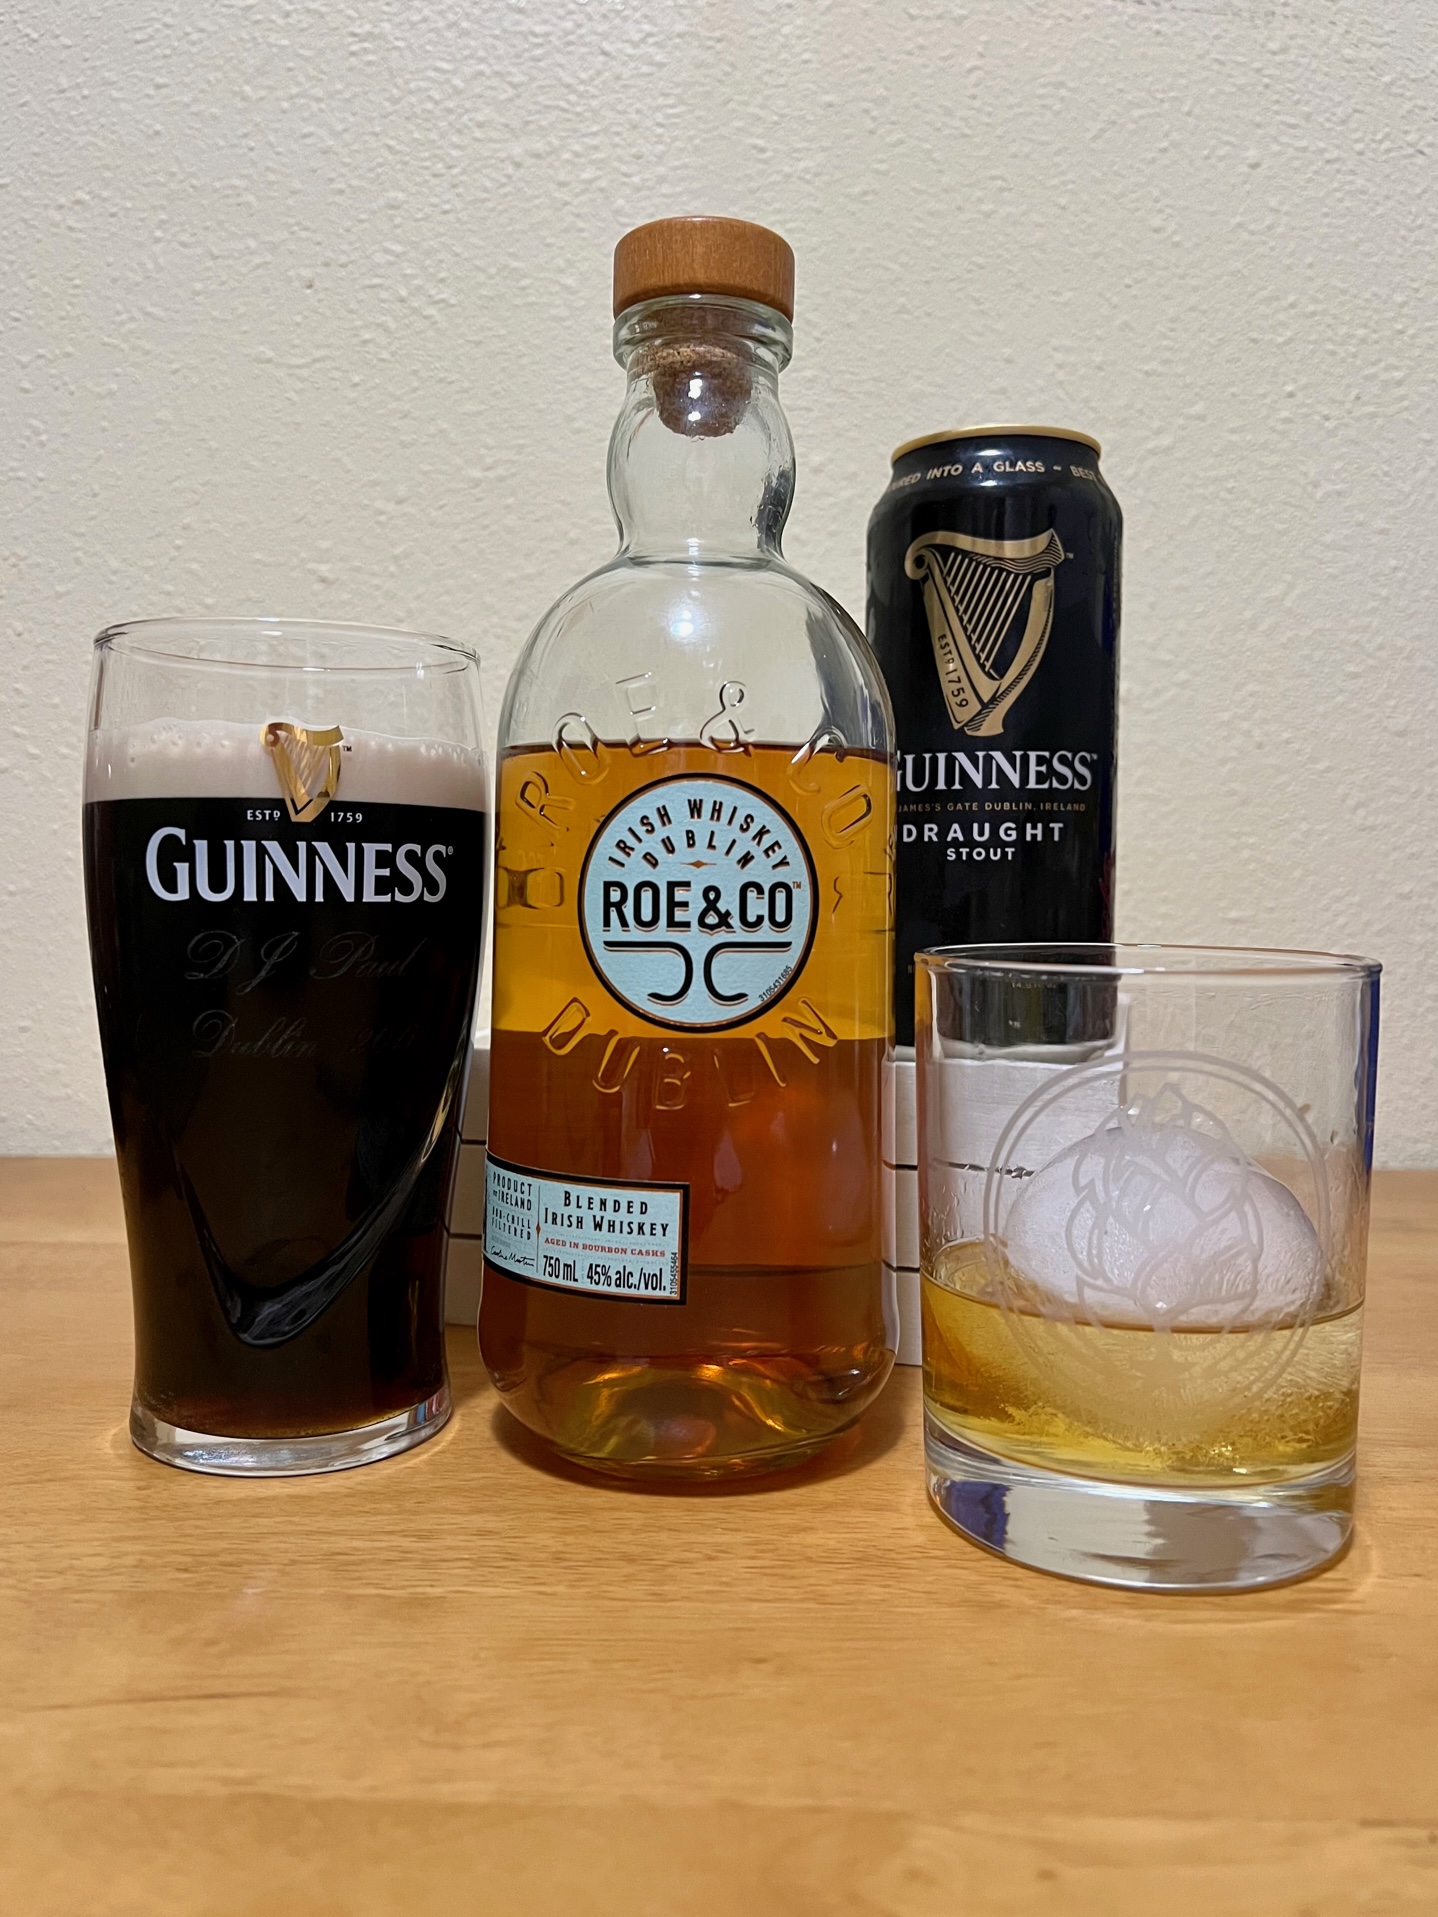 One simple cocktail that can be created is an Irish Boilermaker. All it requires is a dram of Roe & Co and a can of Guinness Draft! Pour Roe & Co neat or in a rocks glass and pour the Guinness Draft in a pint glass. Enjoy!